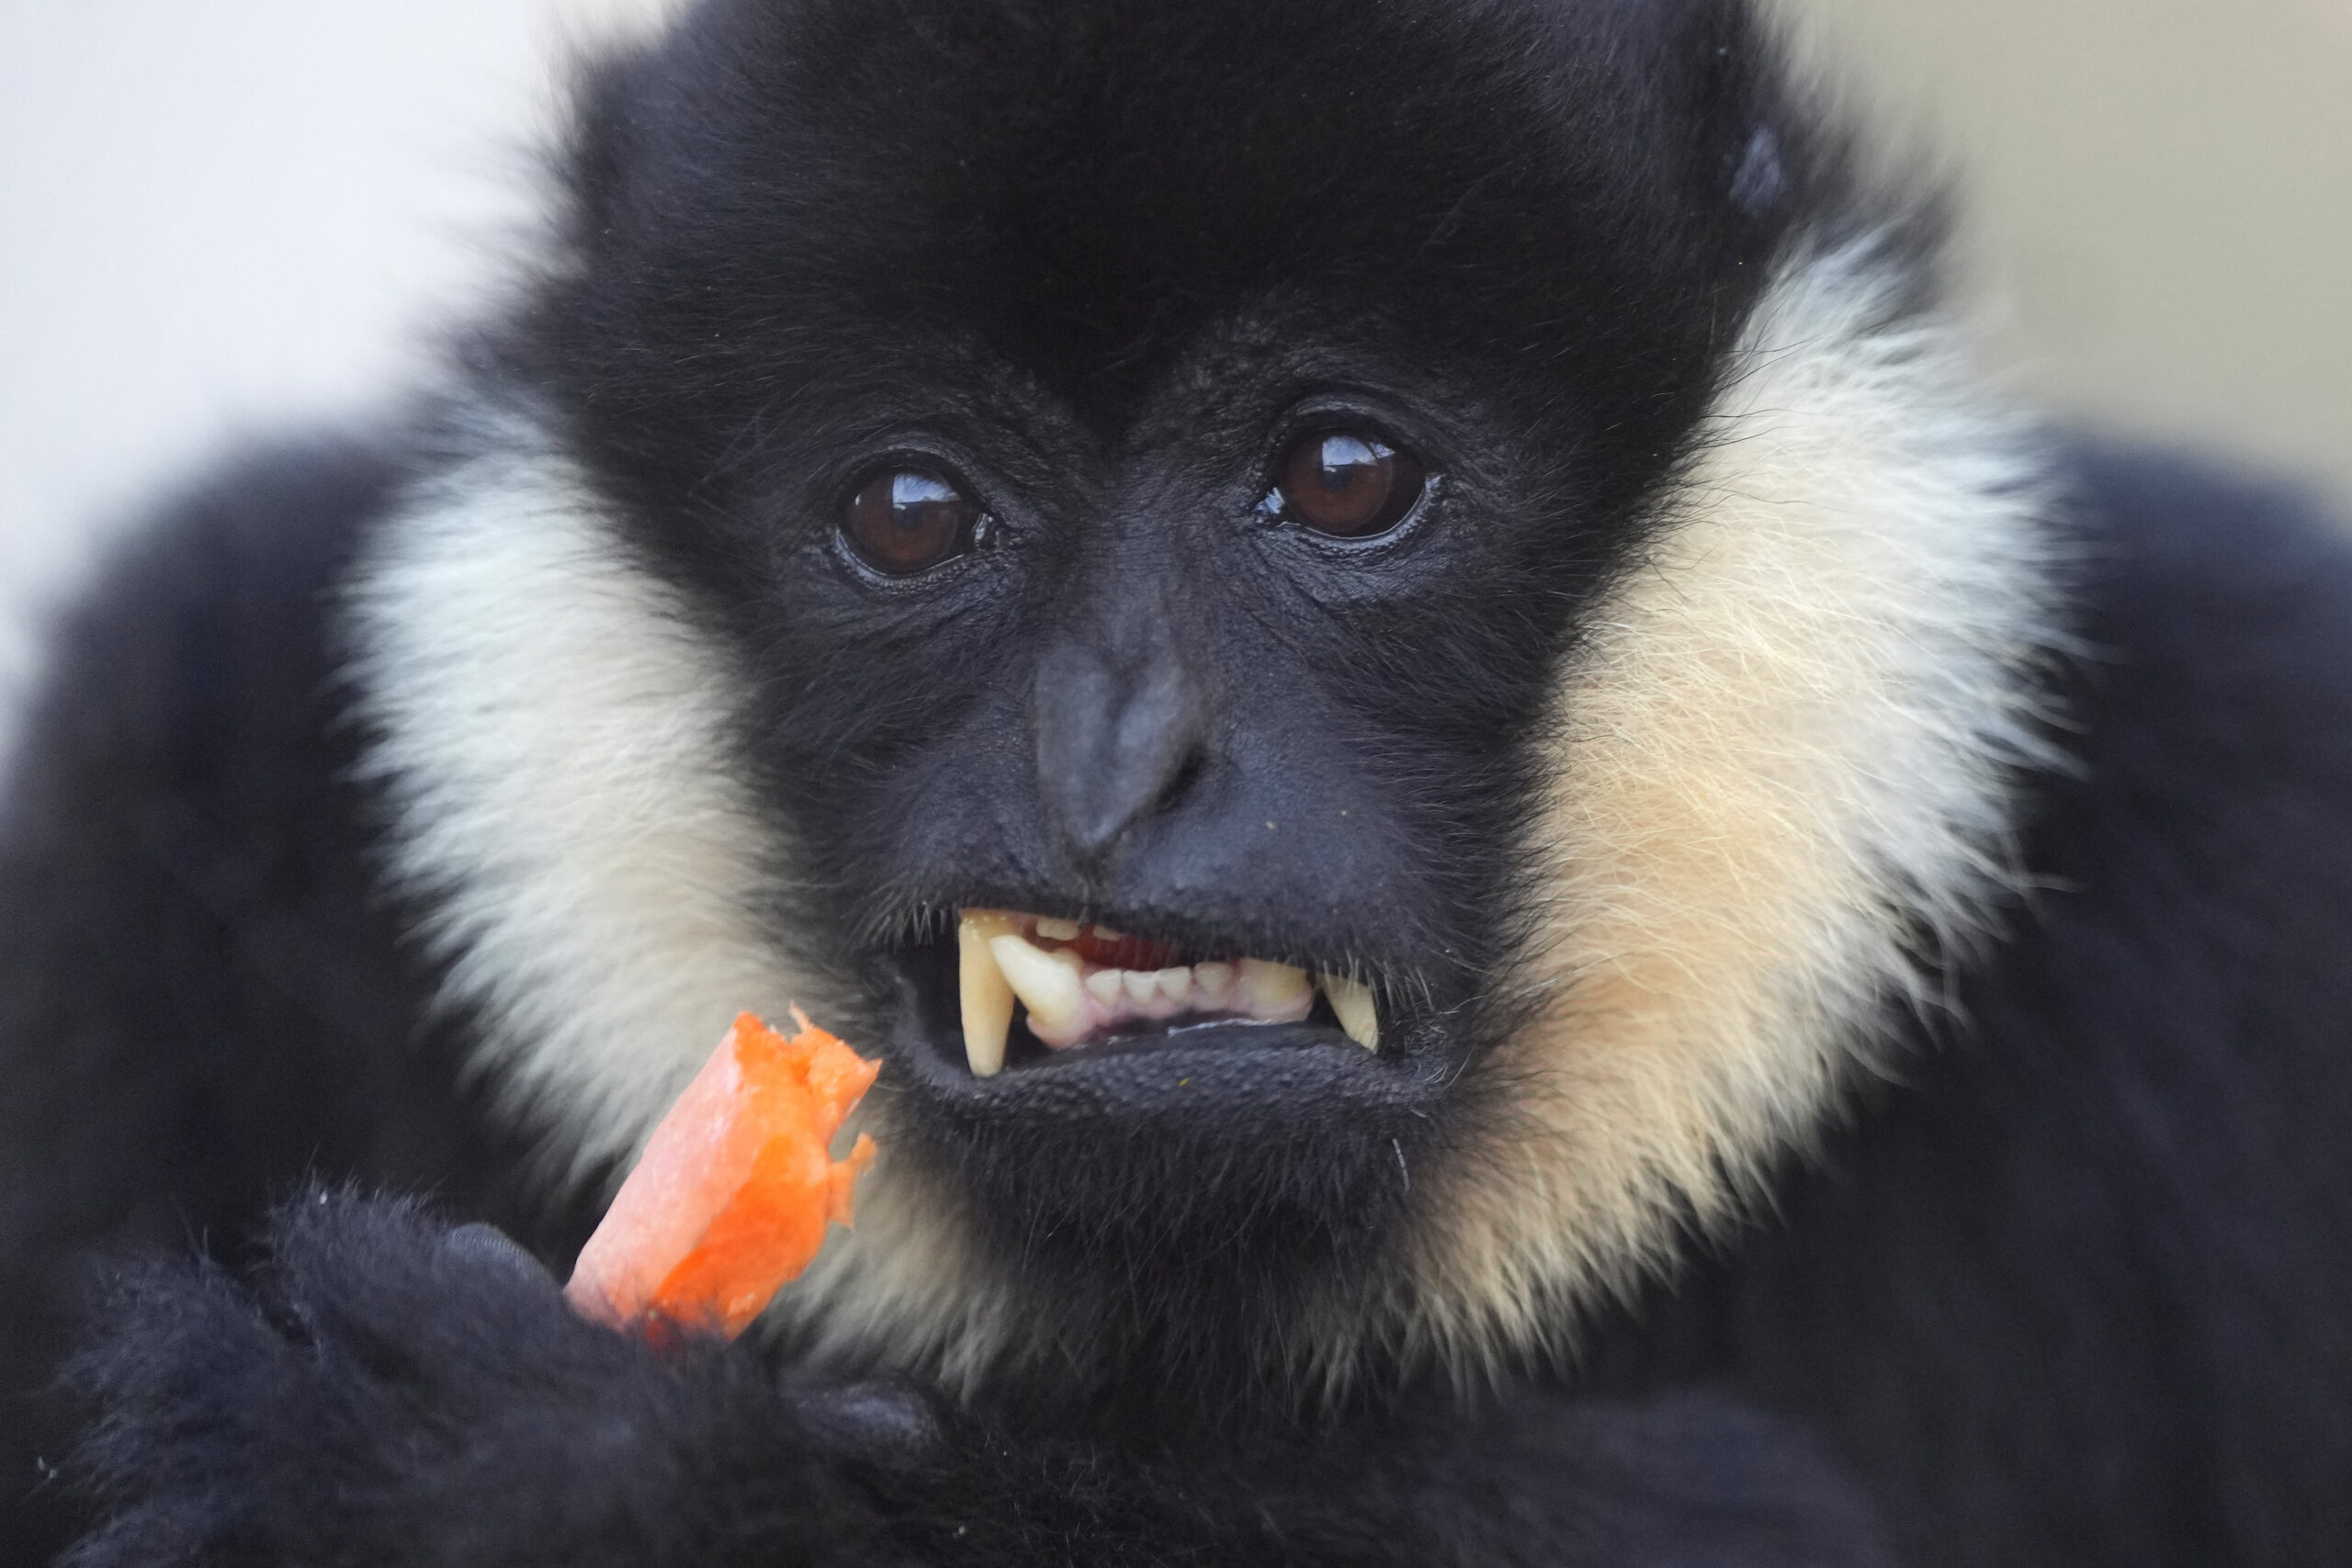 LONDON — ‘This carrot will help clean my teeth, right?’: A Northern white-cheeked gibbon eats a carrot during the stock inventory at ZSL London Zoo, in London, Wednesday, Jan. 3, 2024. The conservation zoo is home to more than 300 different species, from endangered Galapagos giant tortoises and Asiatic lions to critically endangered Sumatran tigers — all of which will be logged and recorded as part of the zoo's annual license requirement.Photo: Kirsty Wigglesworth/AP